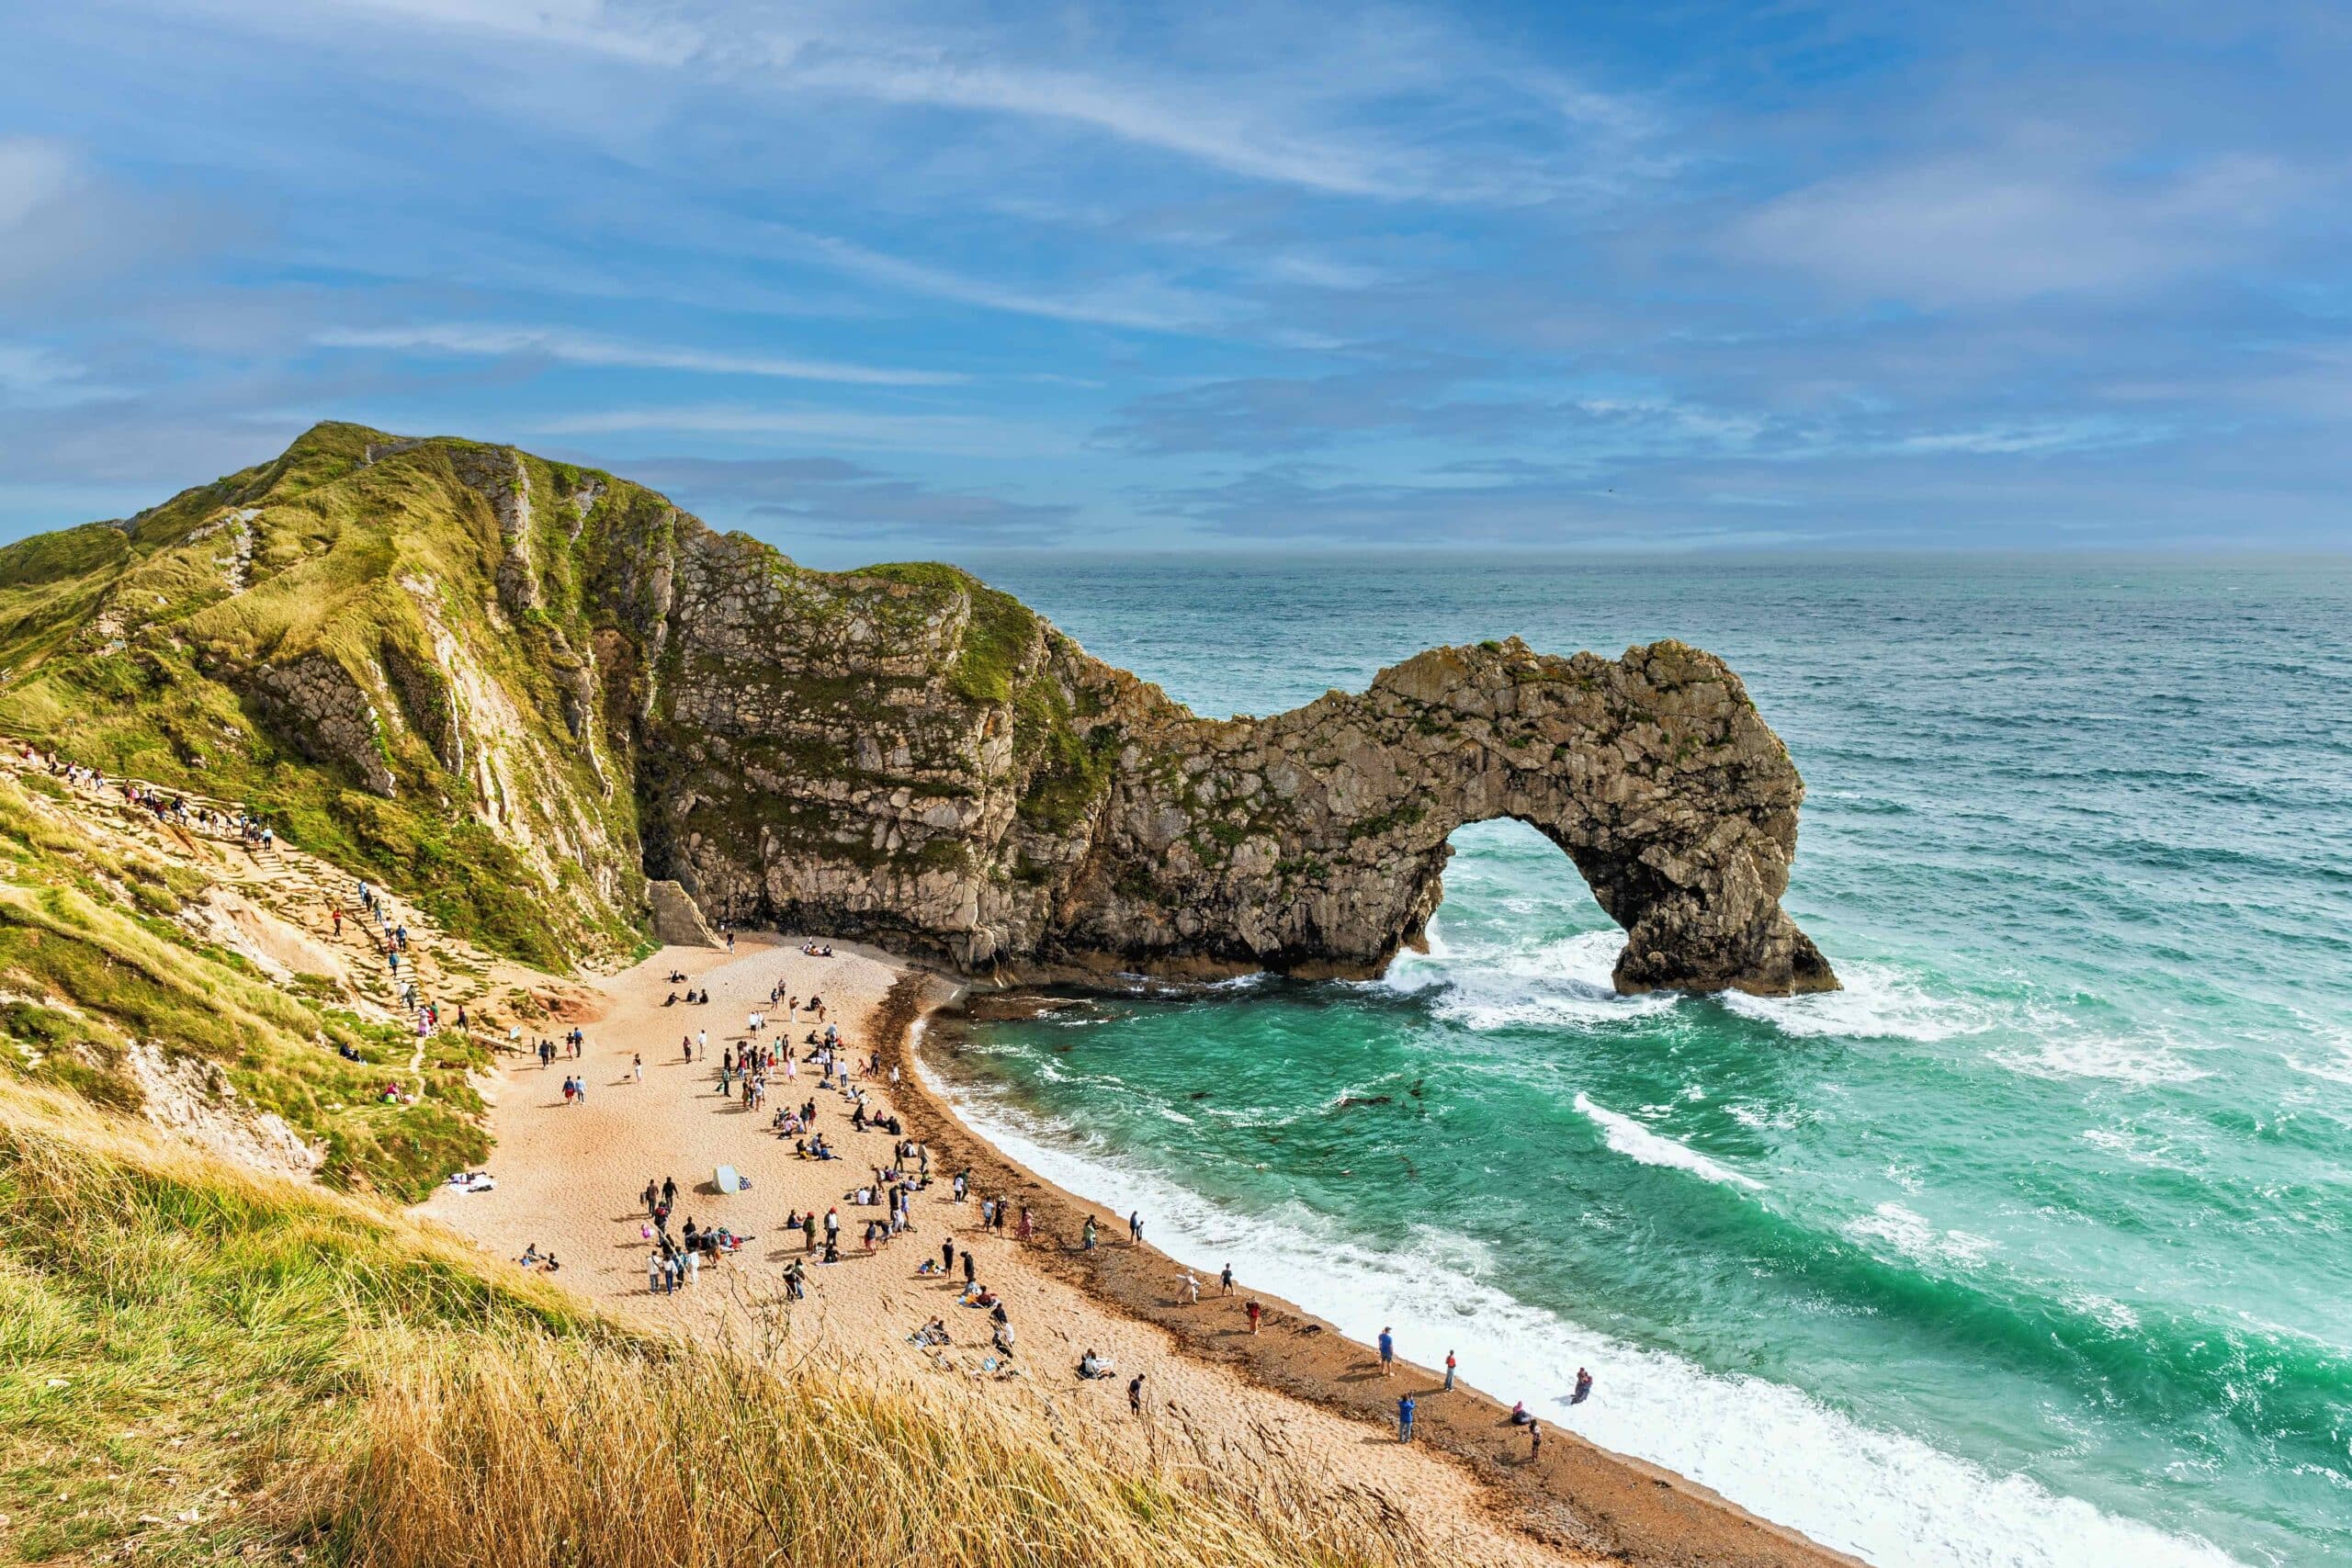 Durdle Door landmark, British cliffs on jurassic coast, deep blue sea, steep cliff with arch over sea and coastal slope with grass to the left.